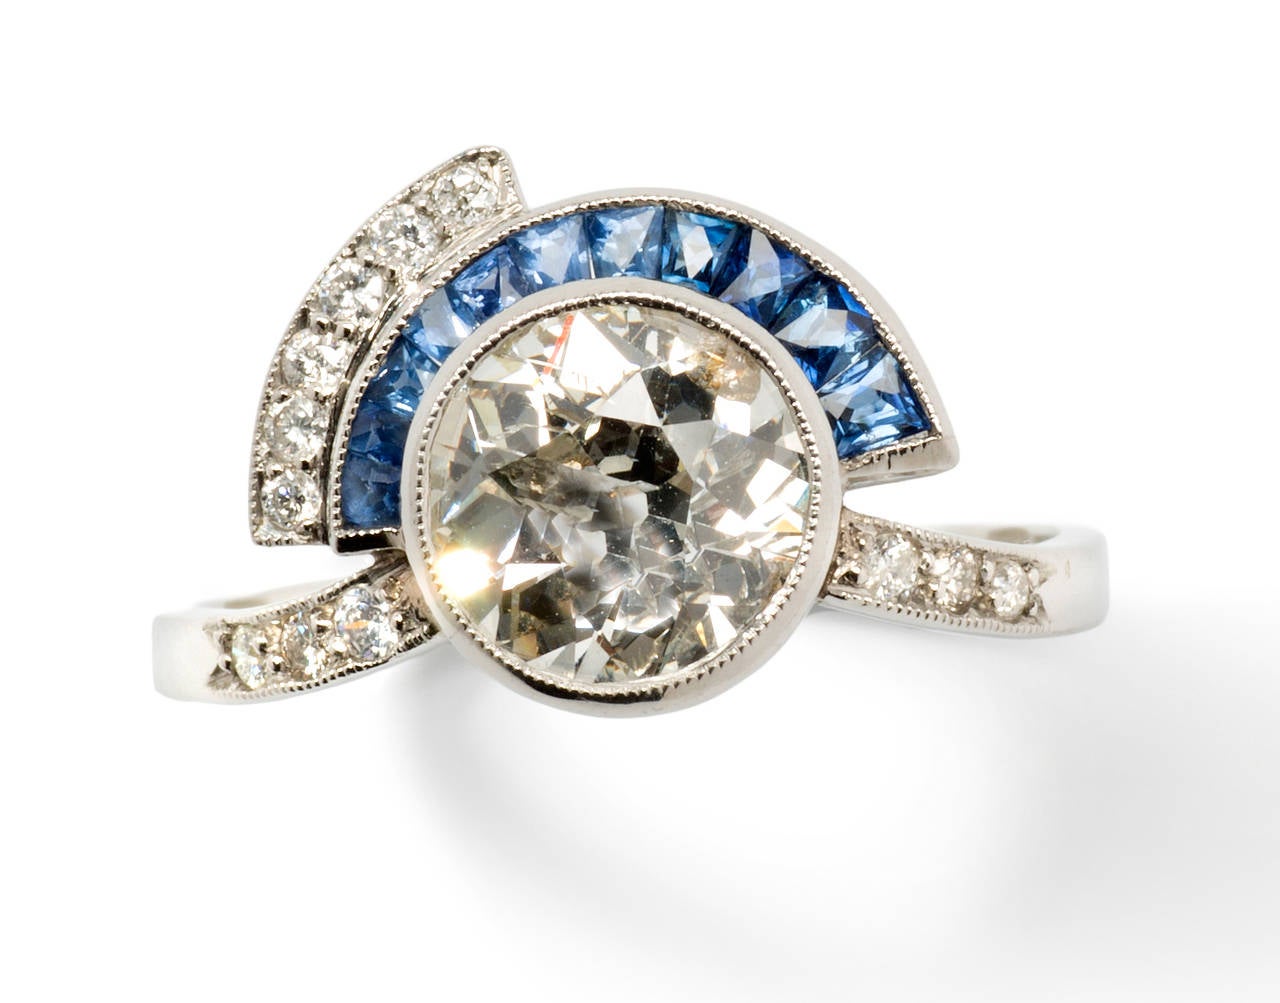 France, ca. 1922. In Art Deco style. Central brilliant-cut diamond weighing circa 2,05 ct, clarity: pique
Accented by 11 sapphires and 12 brilliant-cut small diamonds. Millegrain setting. Mounted in platinum. 
Total weight: 3,88 grams. Ring size: 57